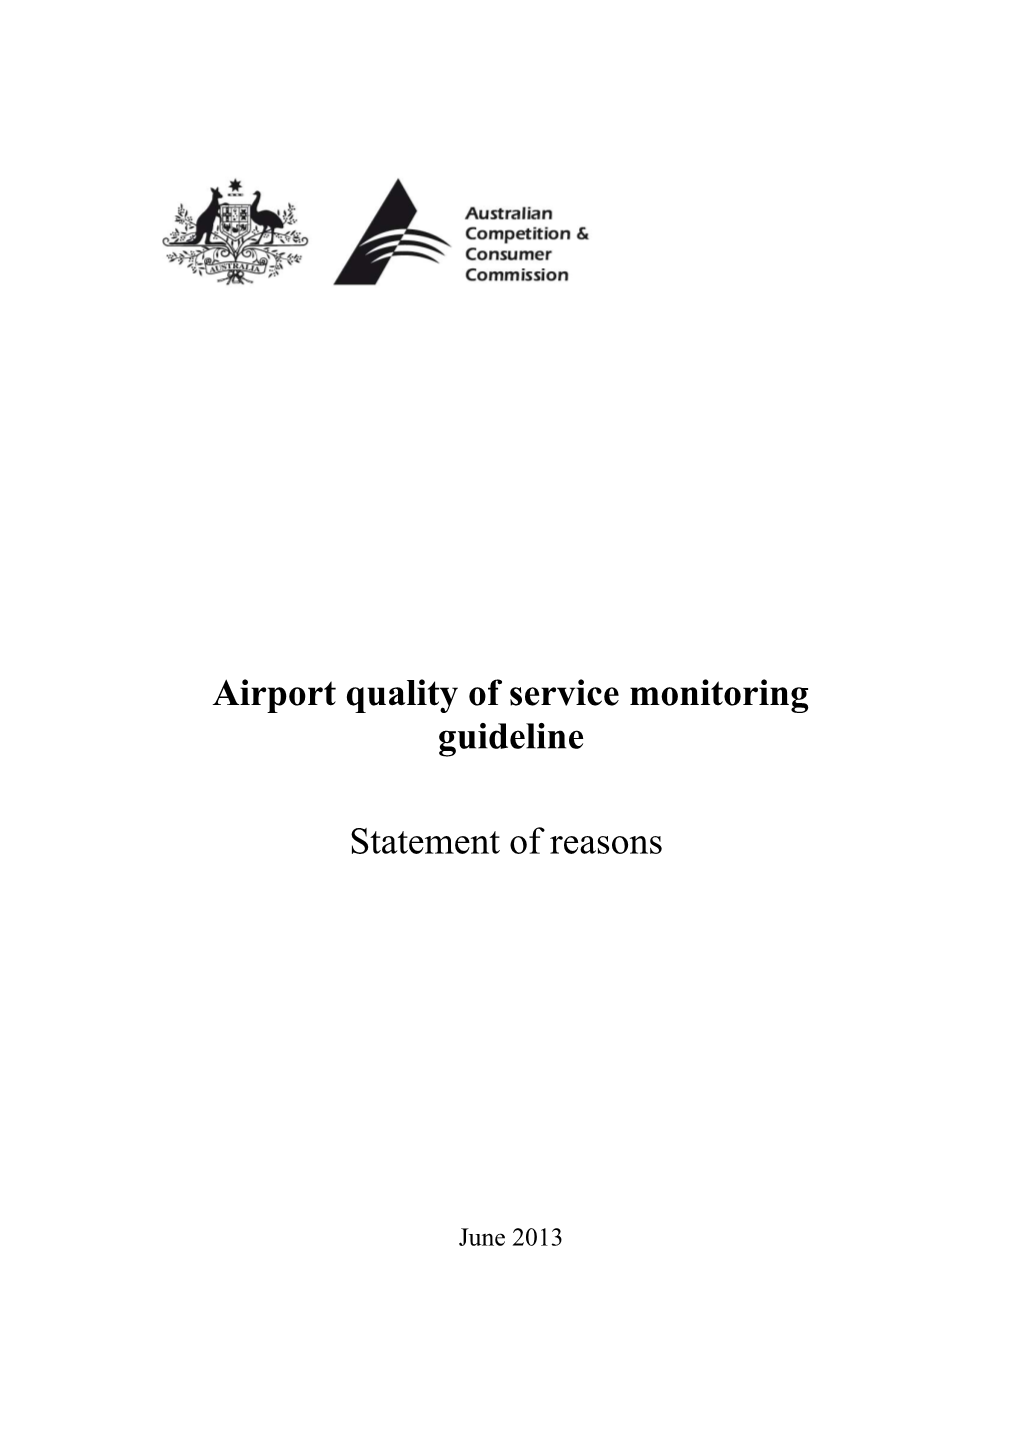 Airport Quality of Service Monitoring Guideline